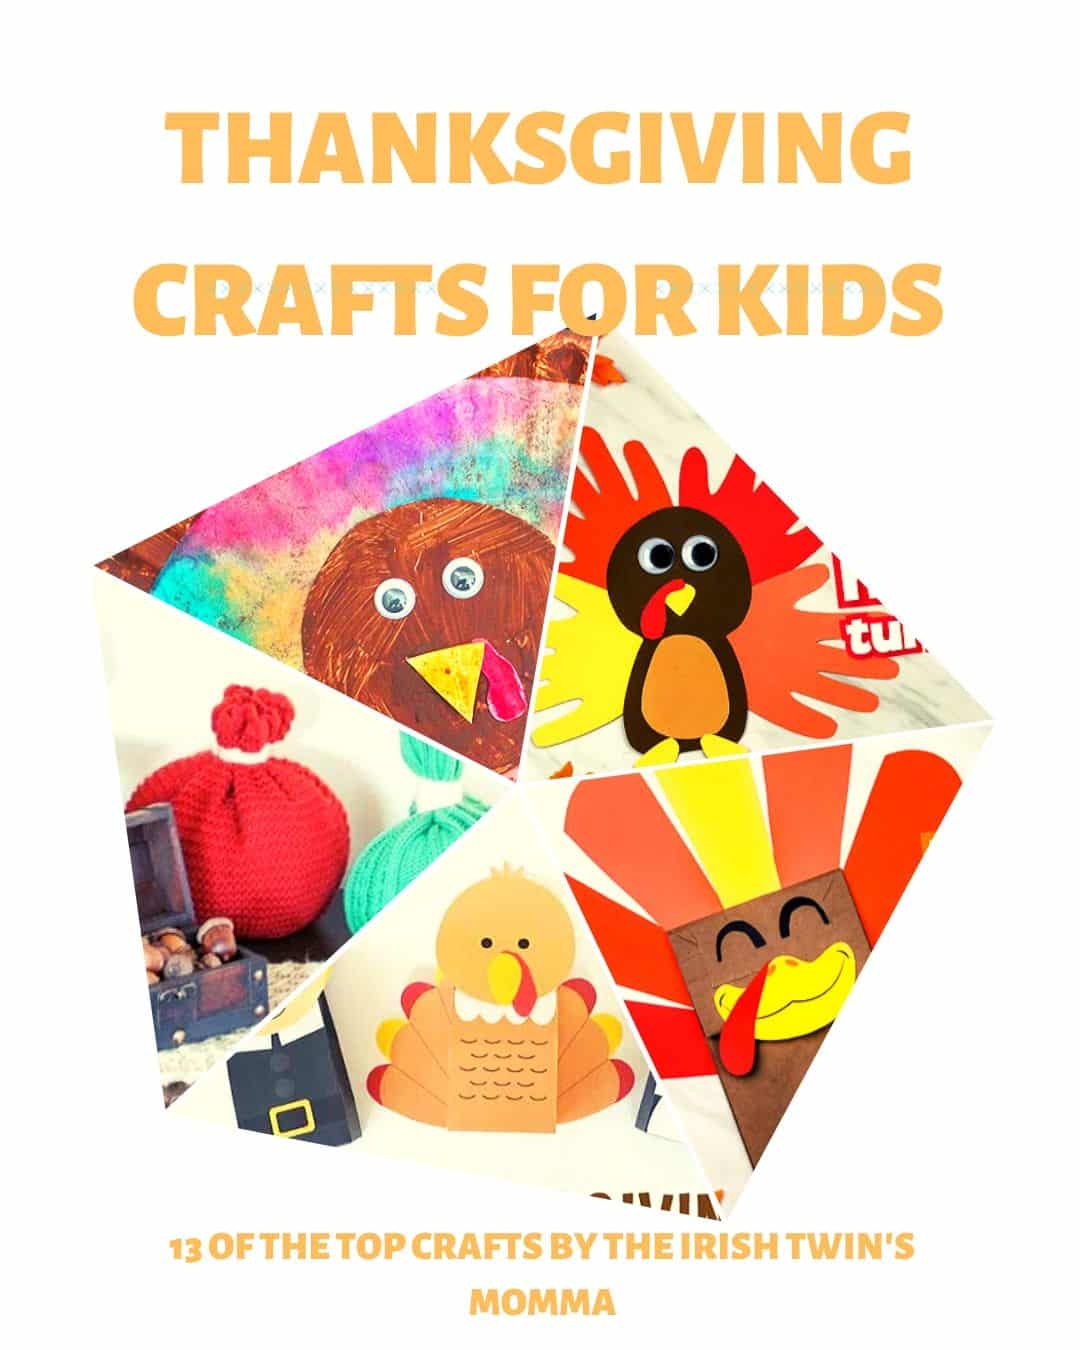 13 of my favorite Thanksgiving day crafts to create together while teaching my kids about the meaning of Thanksgiving. via @irishtwinsmom11